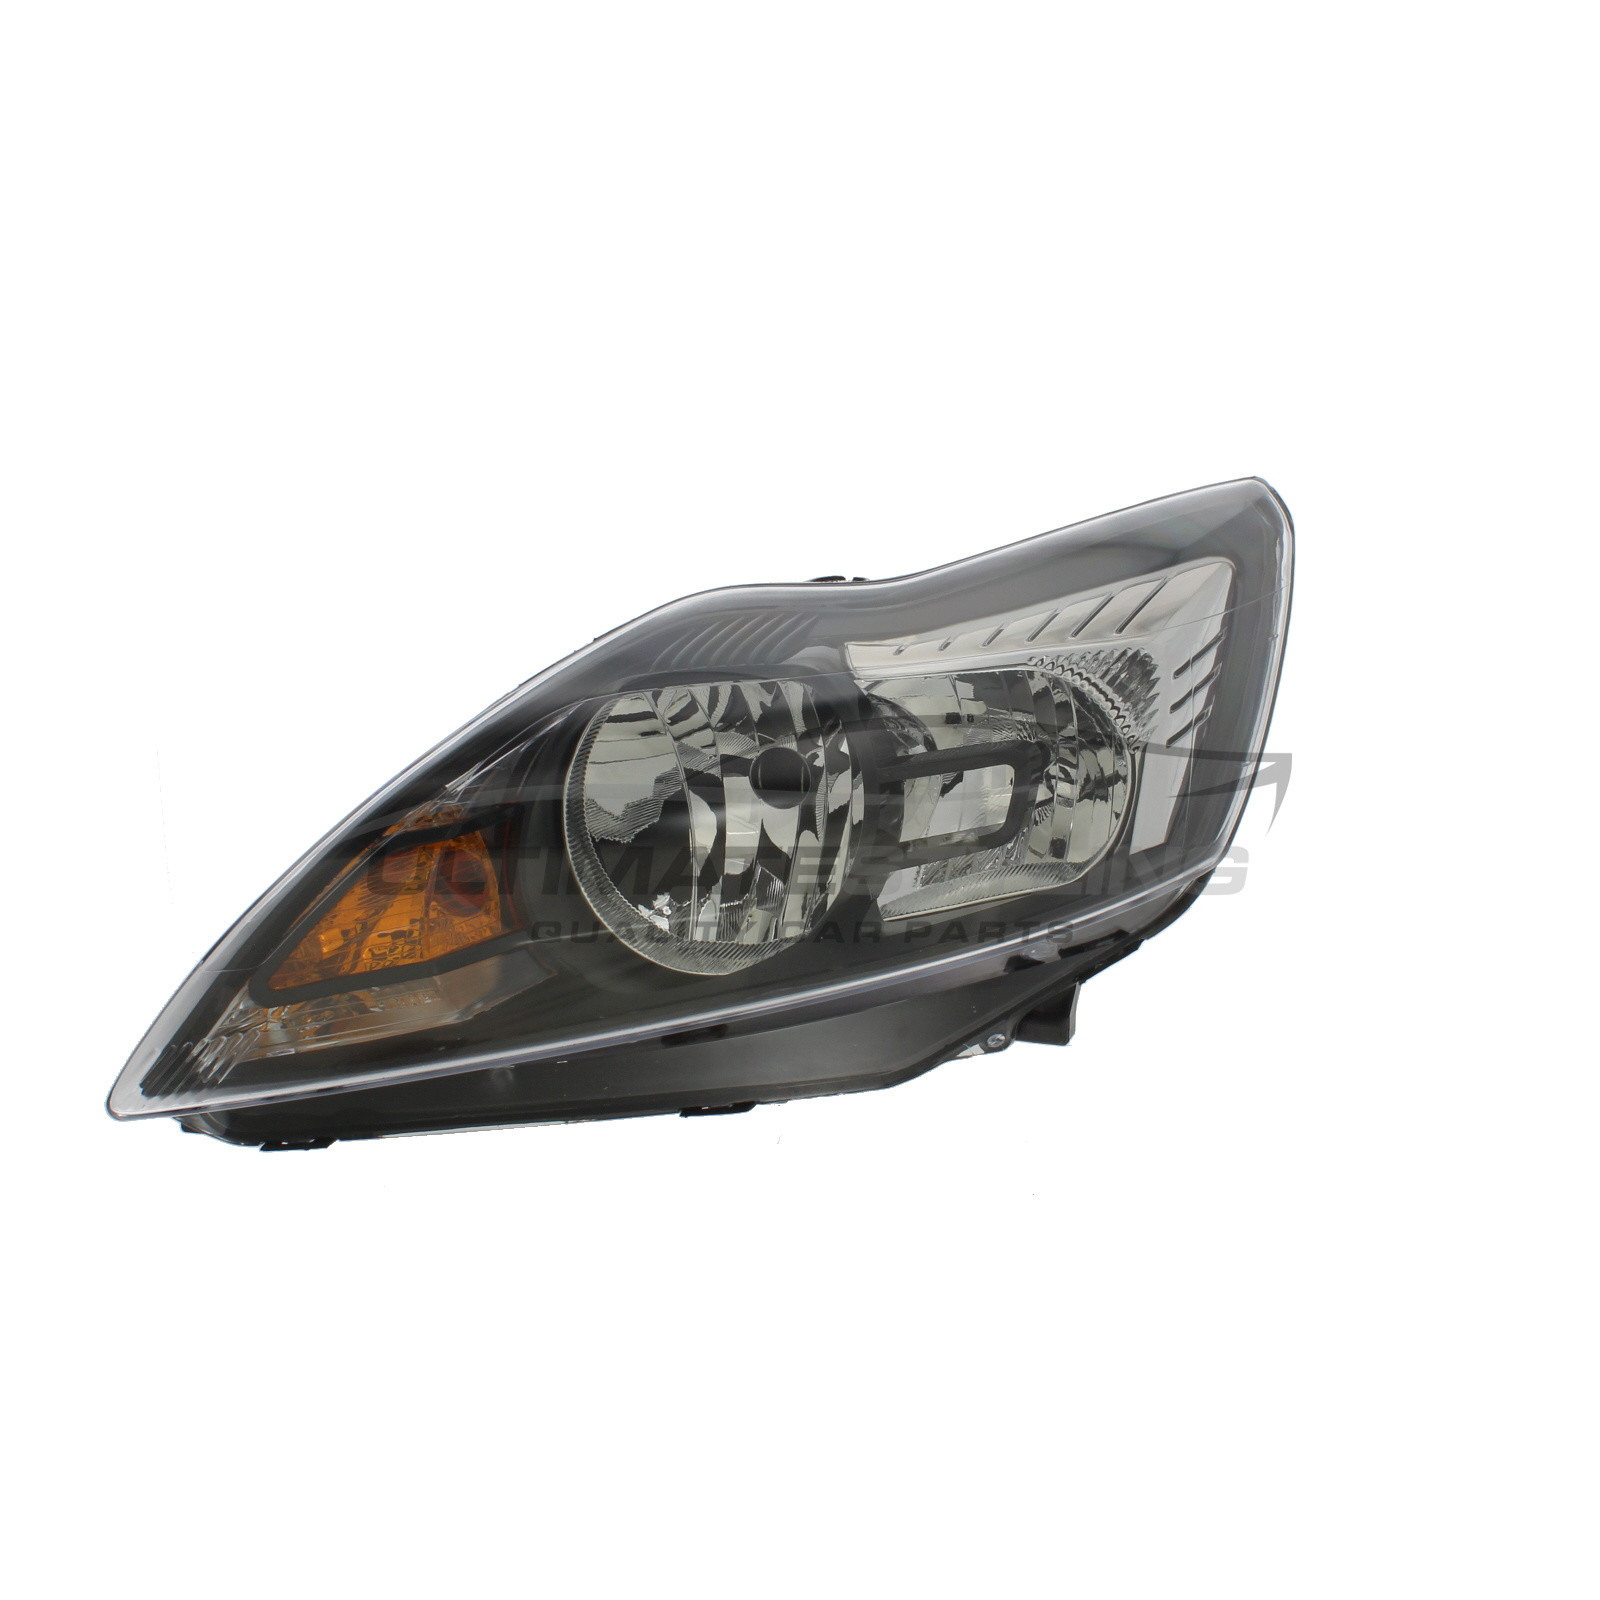 Ford Focus 2008-2011 Halogen, Electric With Motor, Black Headlight / Headlamp Including Chrome Insert Passengers Side (LH)